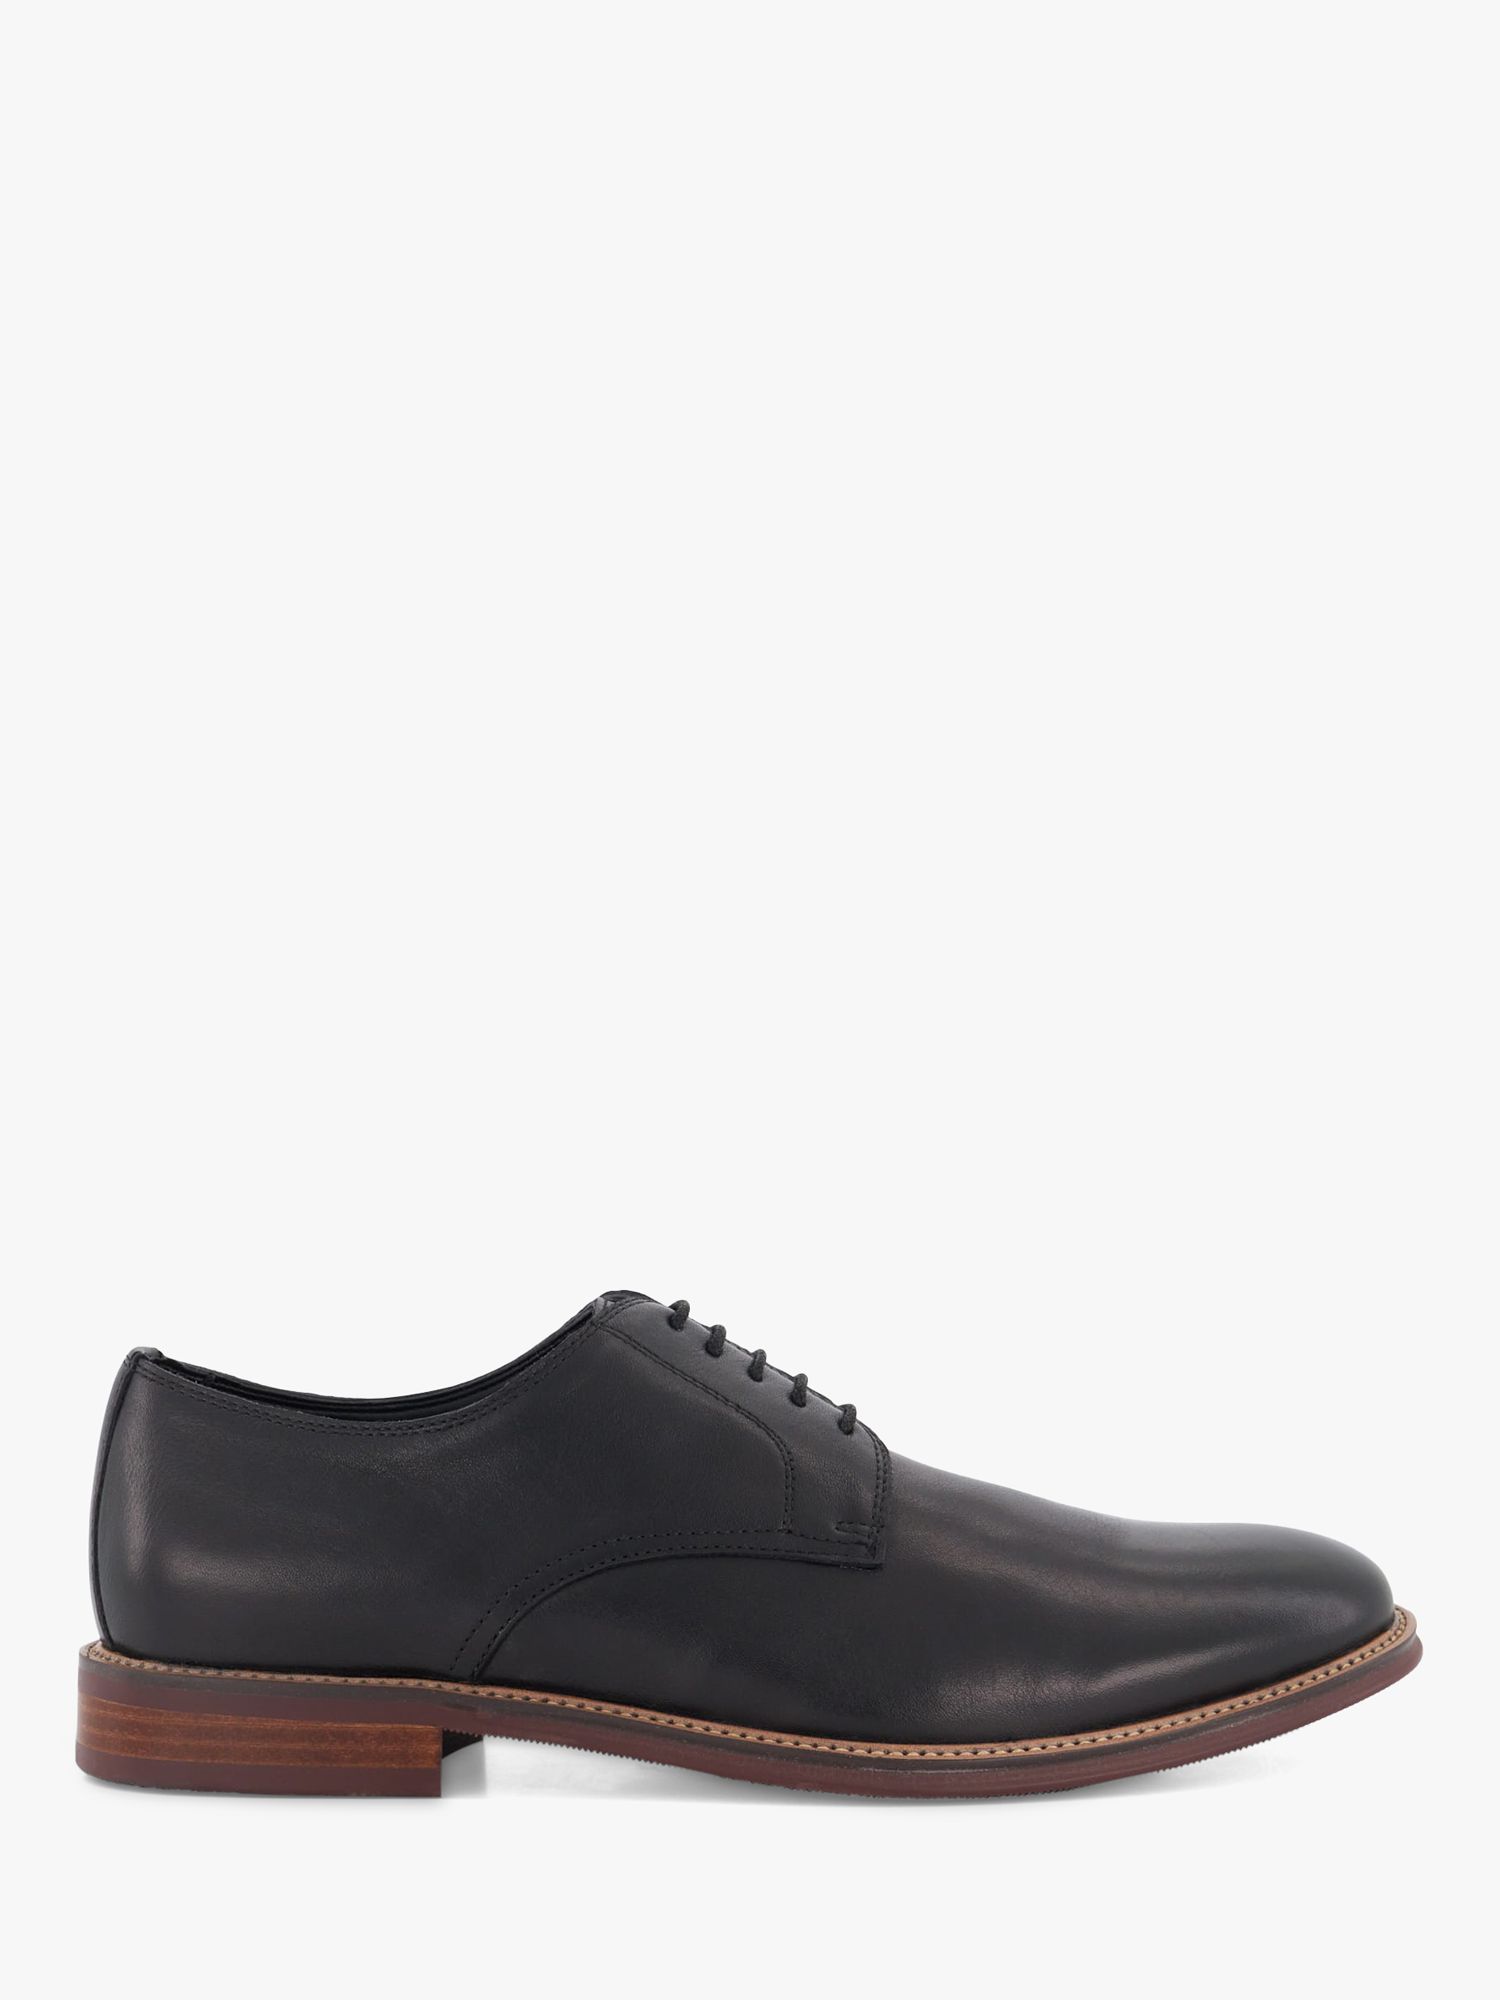 Dune Stanley Leather Derby Shoes, Black at John Lewis & Partners